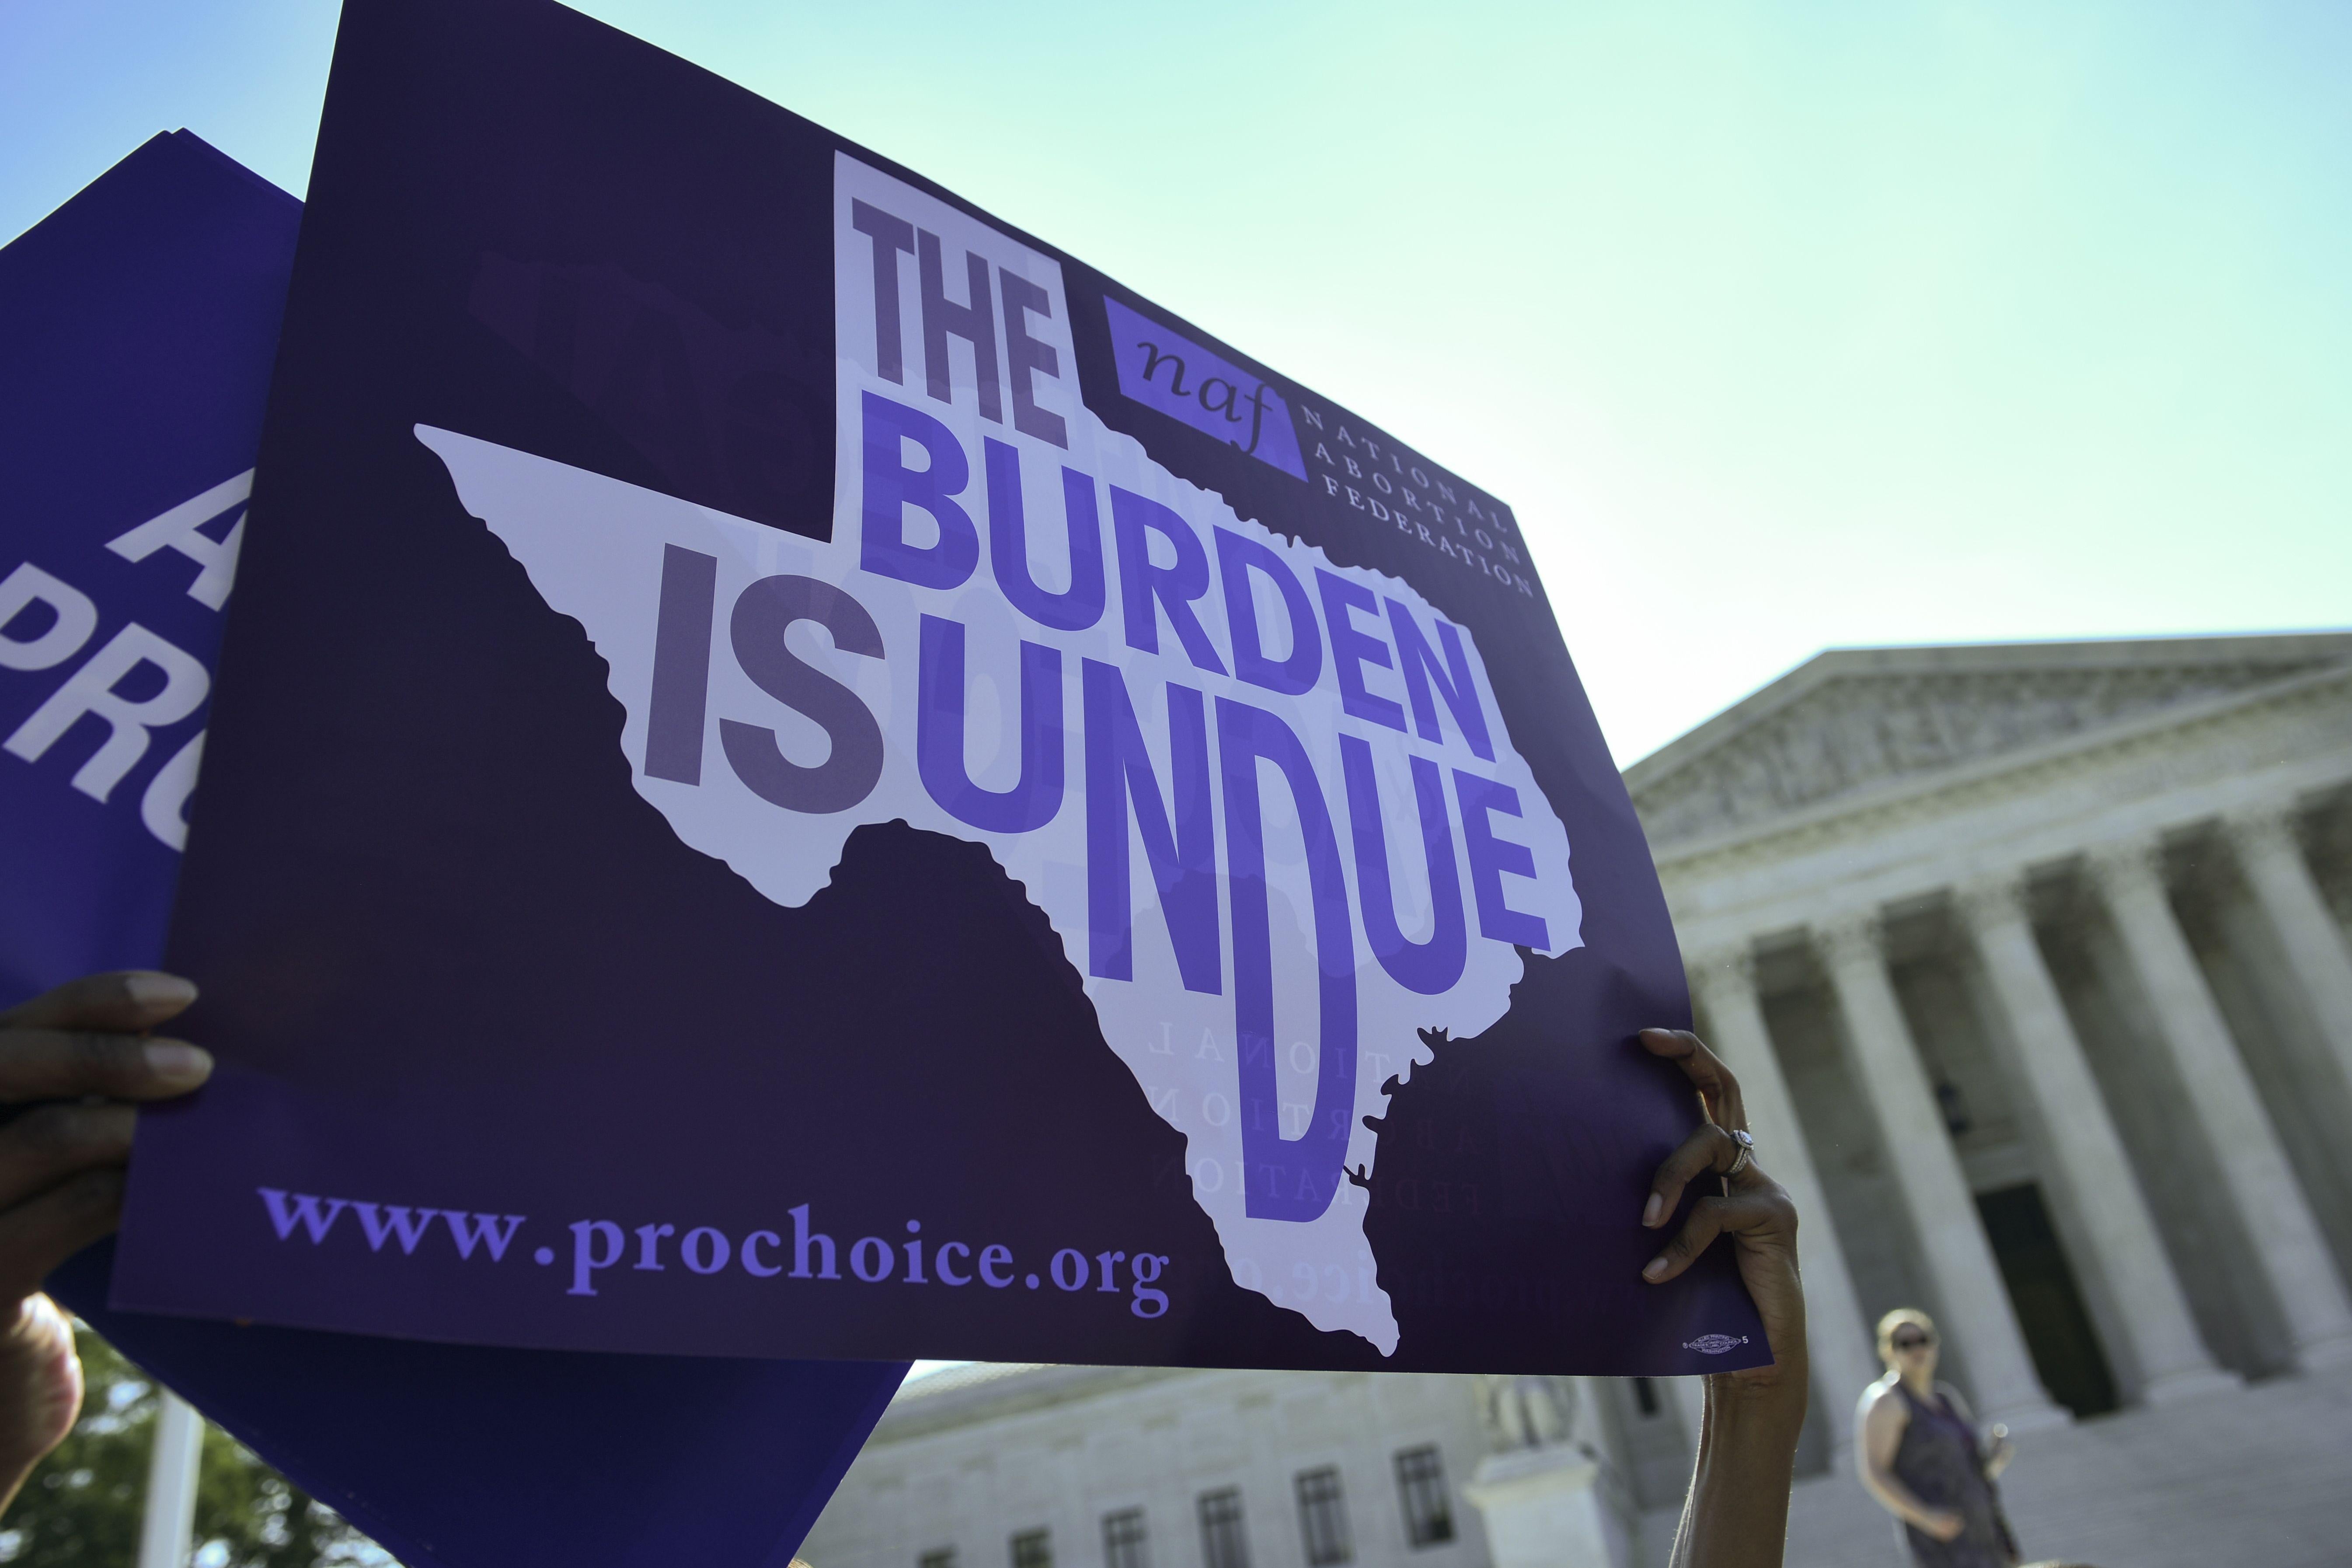 An abortion rights activist holds a placard that reads "The Burden Is Undue" outside of the Supreme Court.